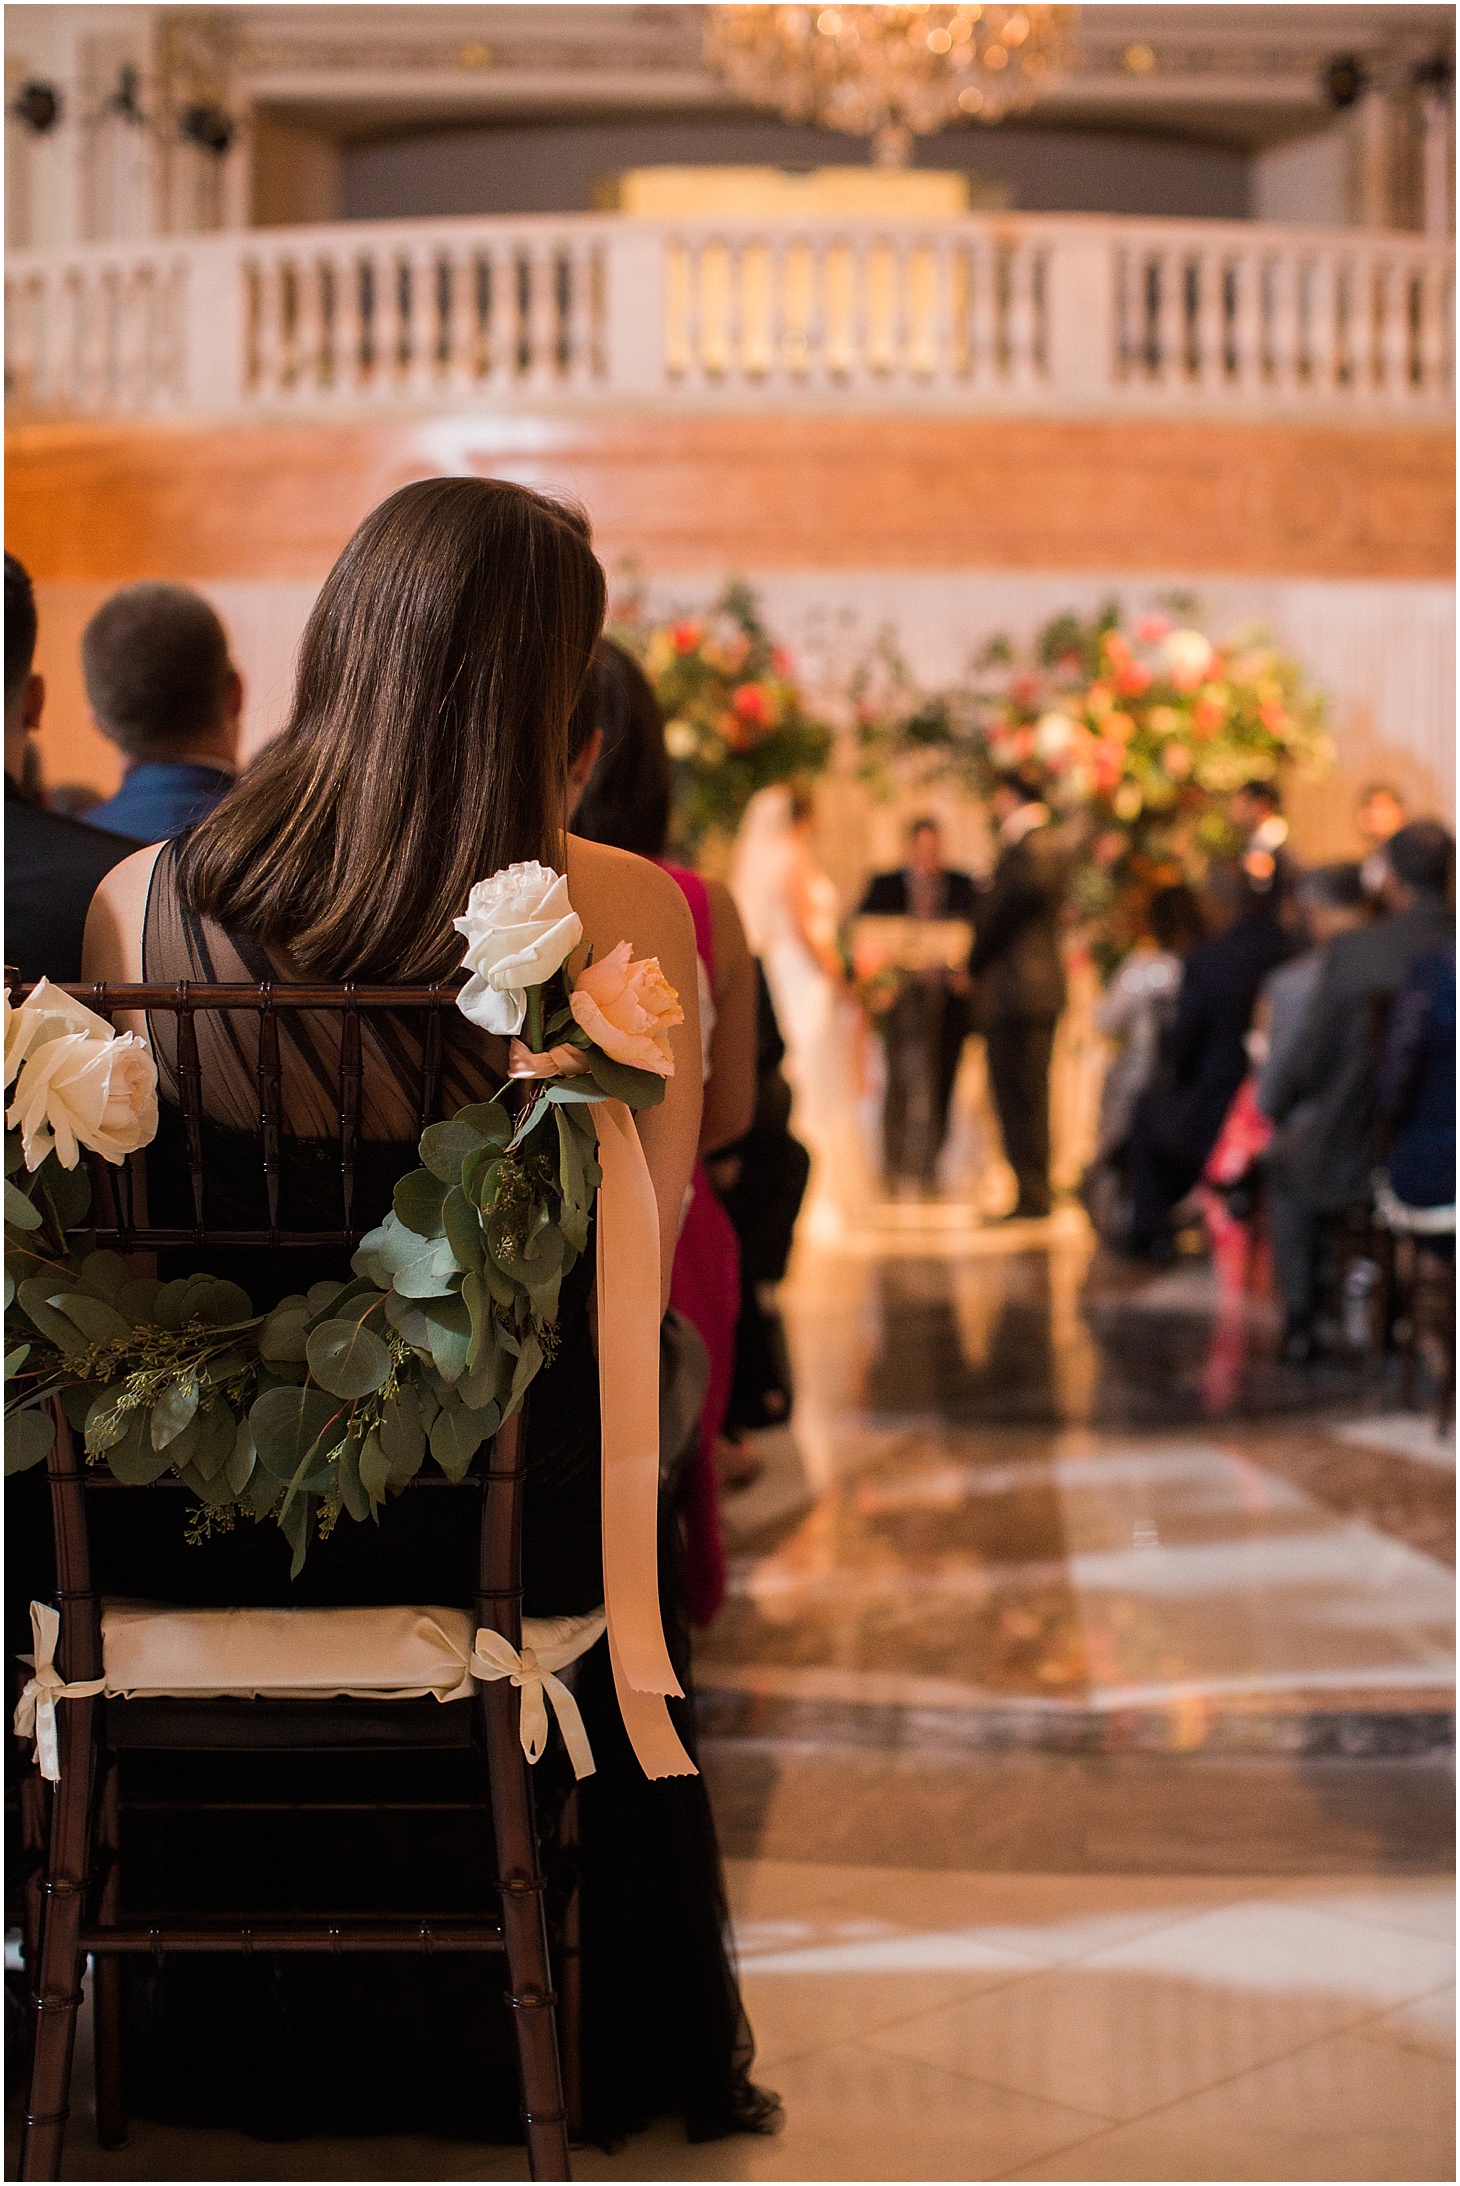 Interfaith Wedding Ceremony at the National Museum of Women in the Arts | DC Wedding by Sarah Bradshaw Photography